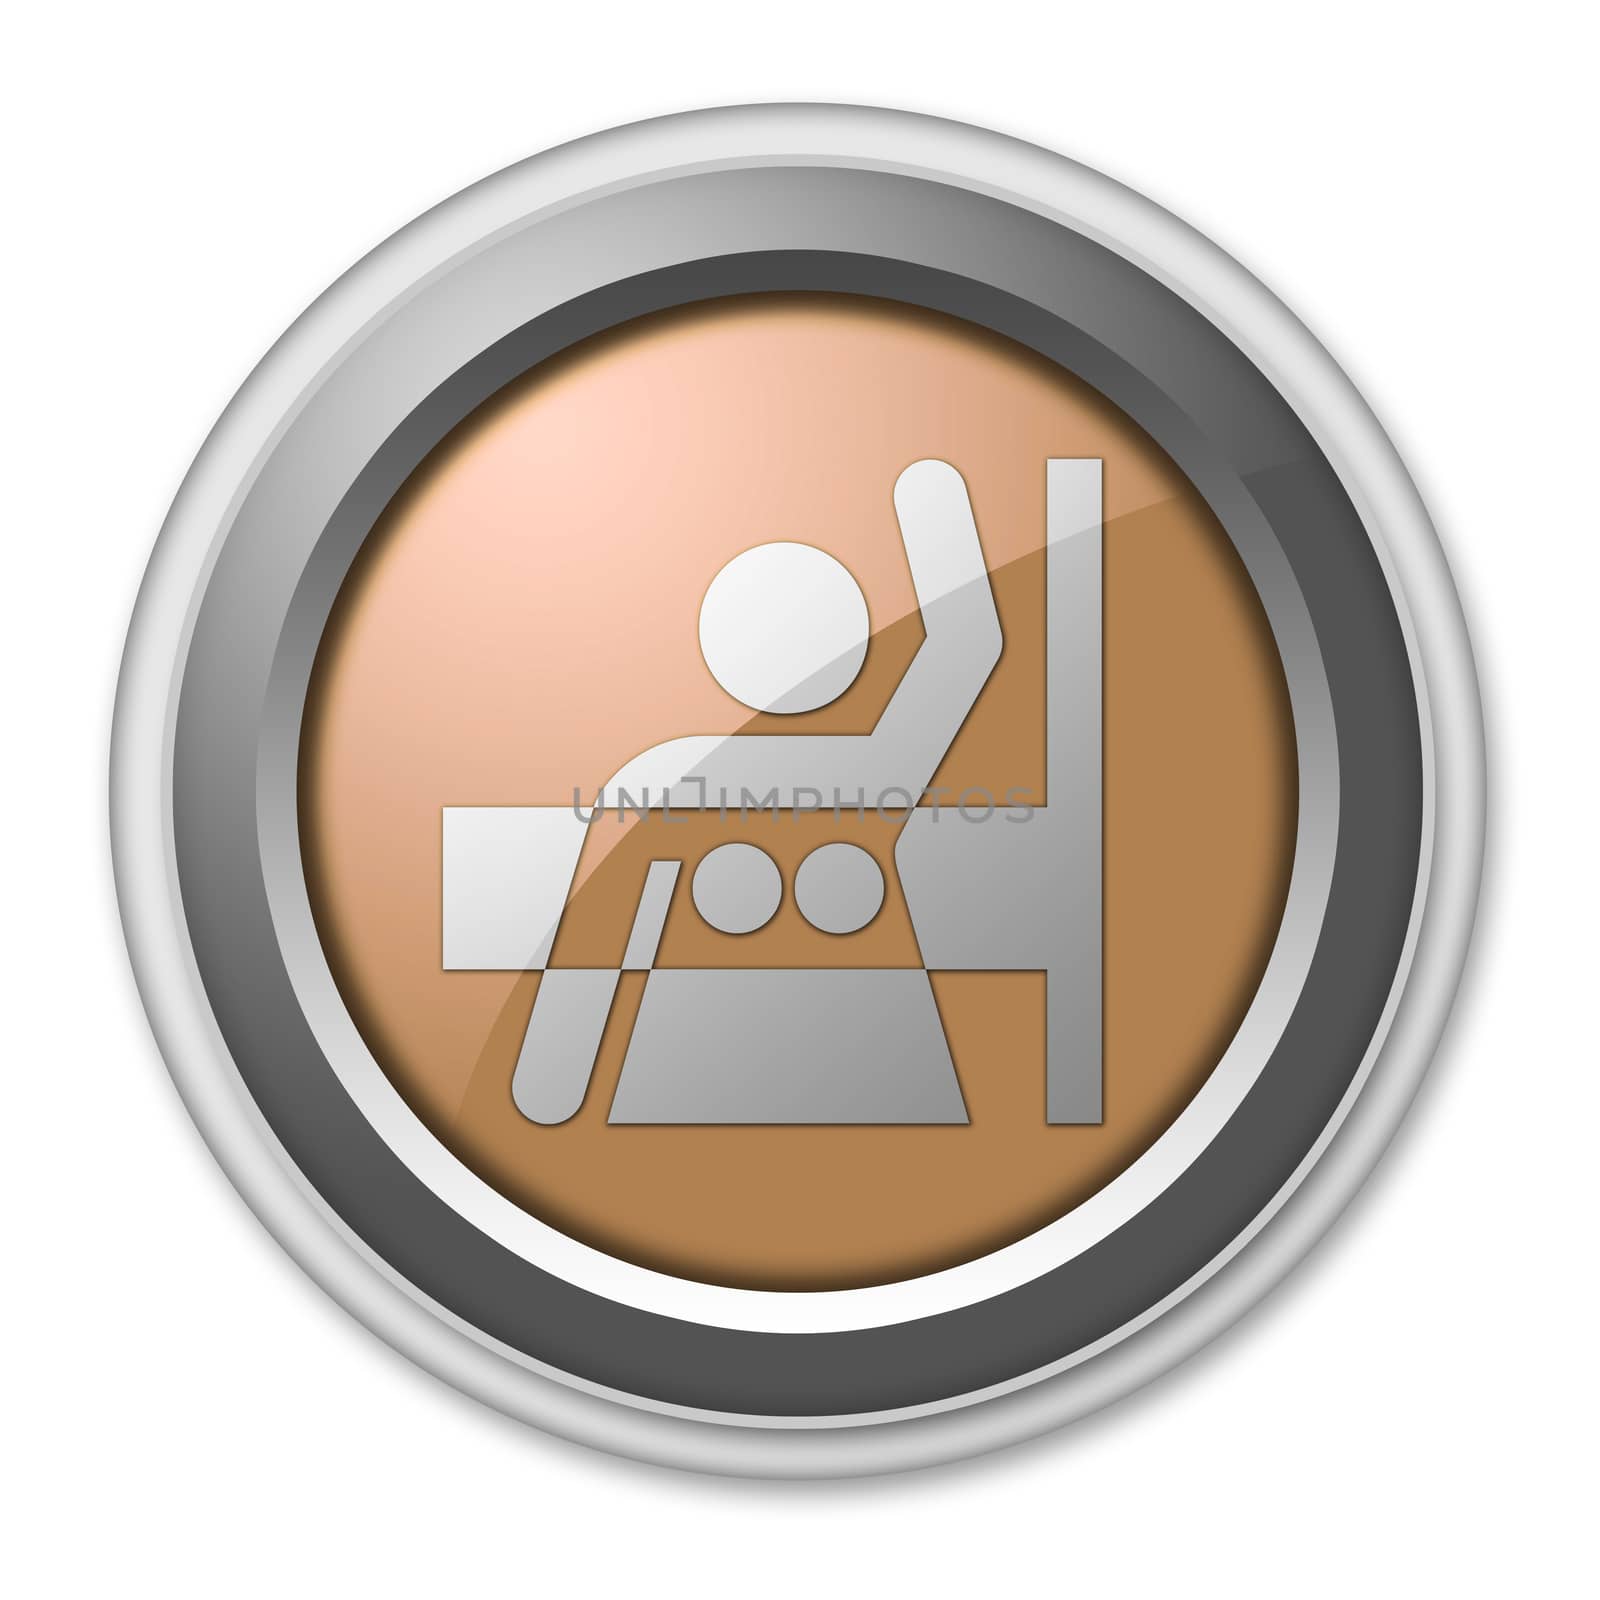 Icon, Button, Pictogram Mammography by mindscanner